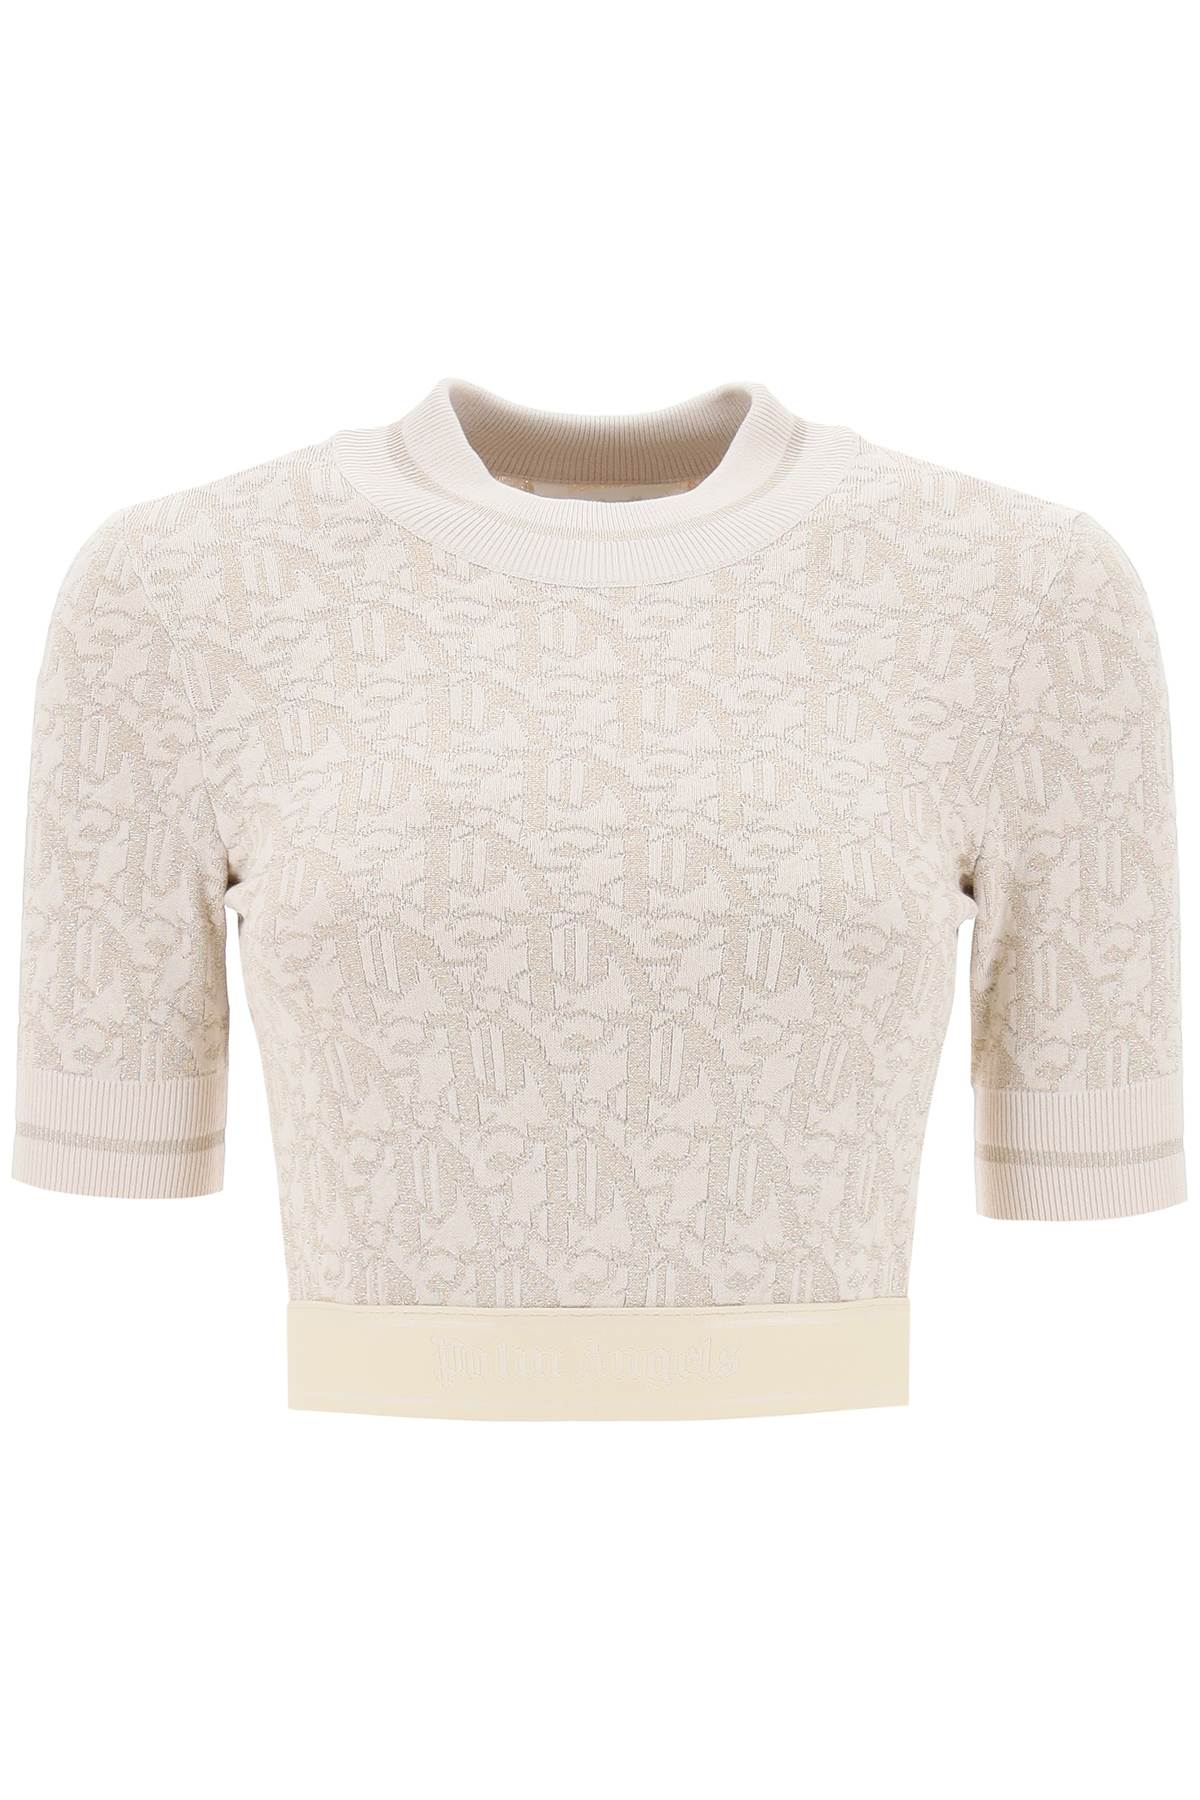 Palm angels monogram cropped top in lurex knit-0